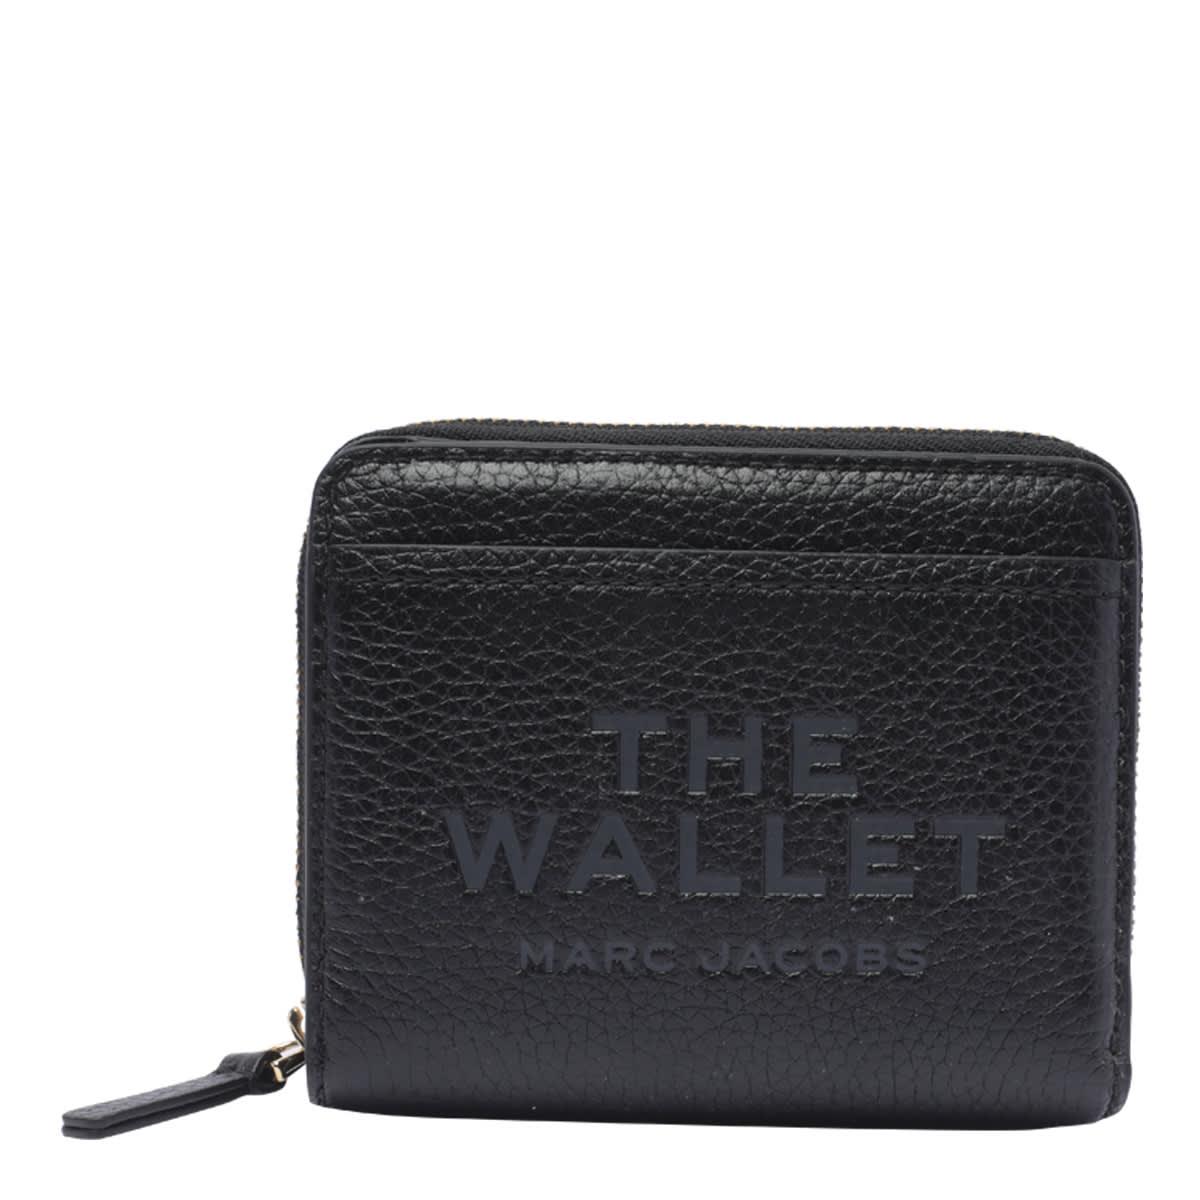 The Mini Compact Wallet